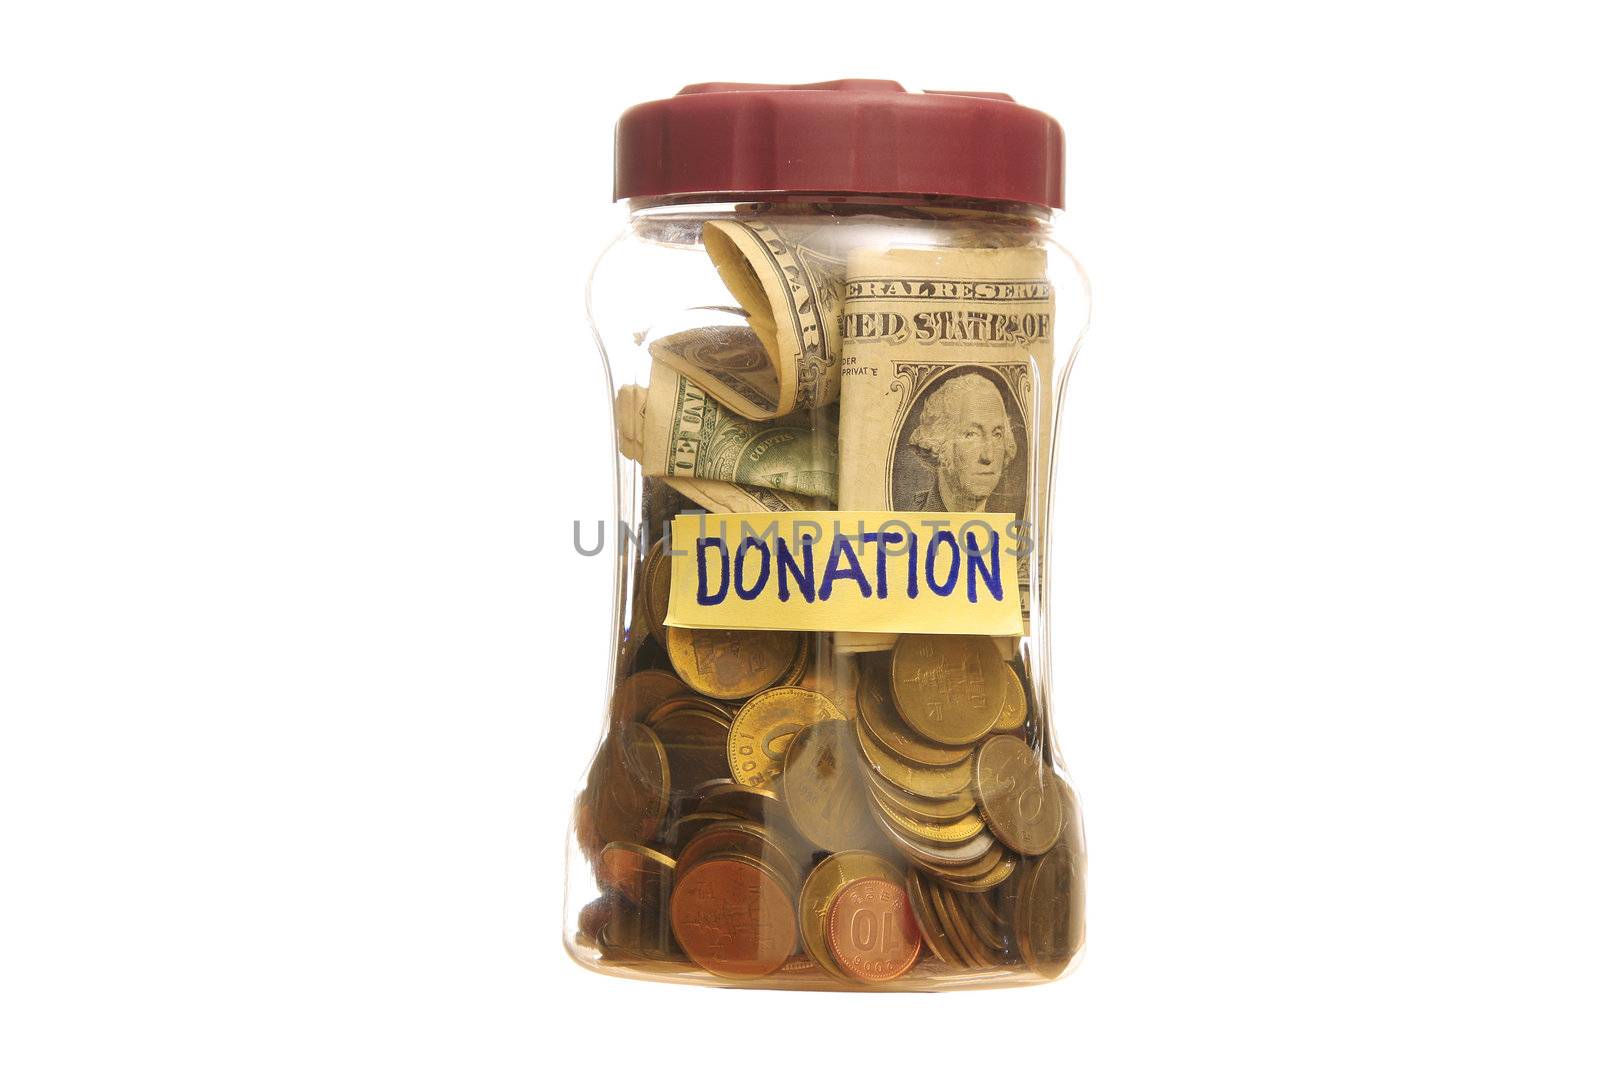 Donation in a closed Jar over a white background.